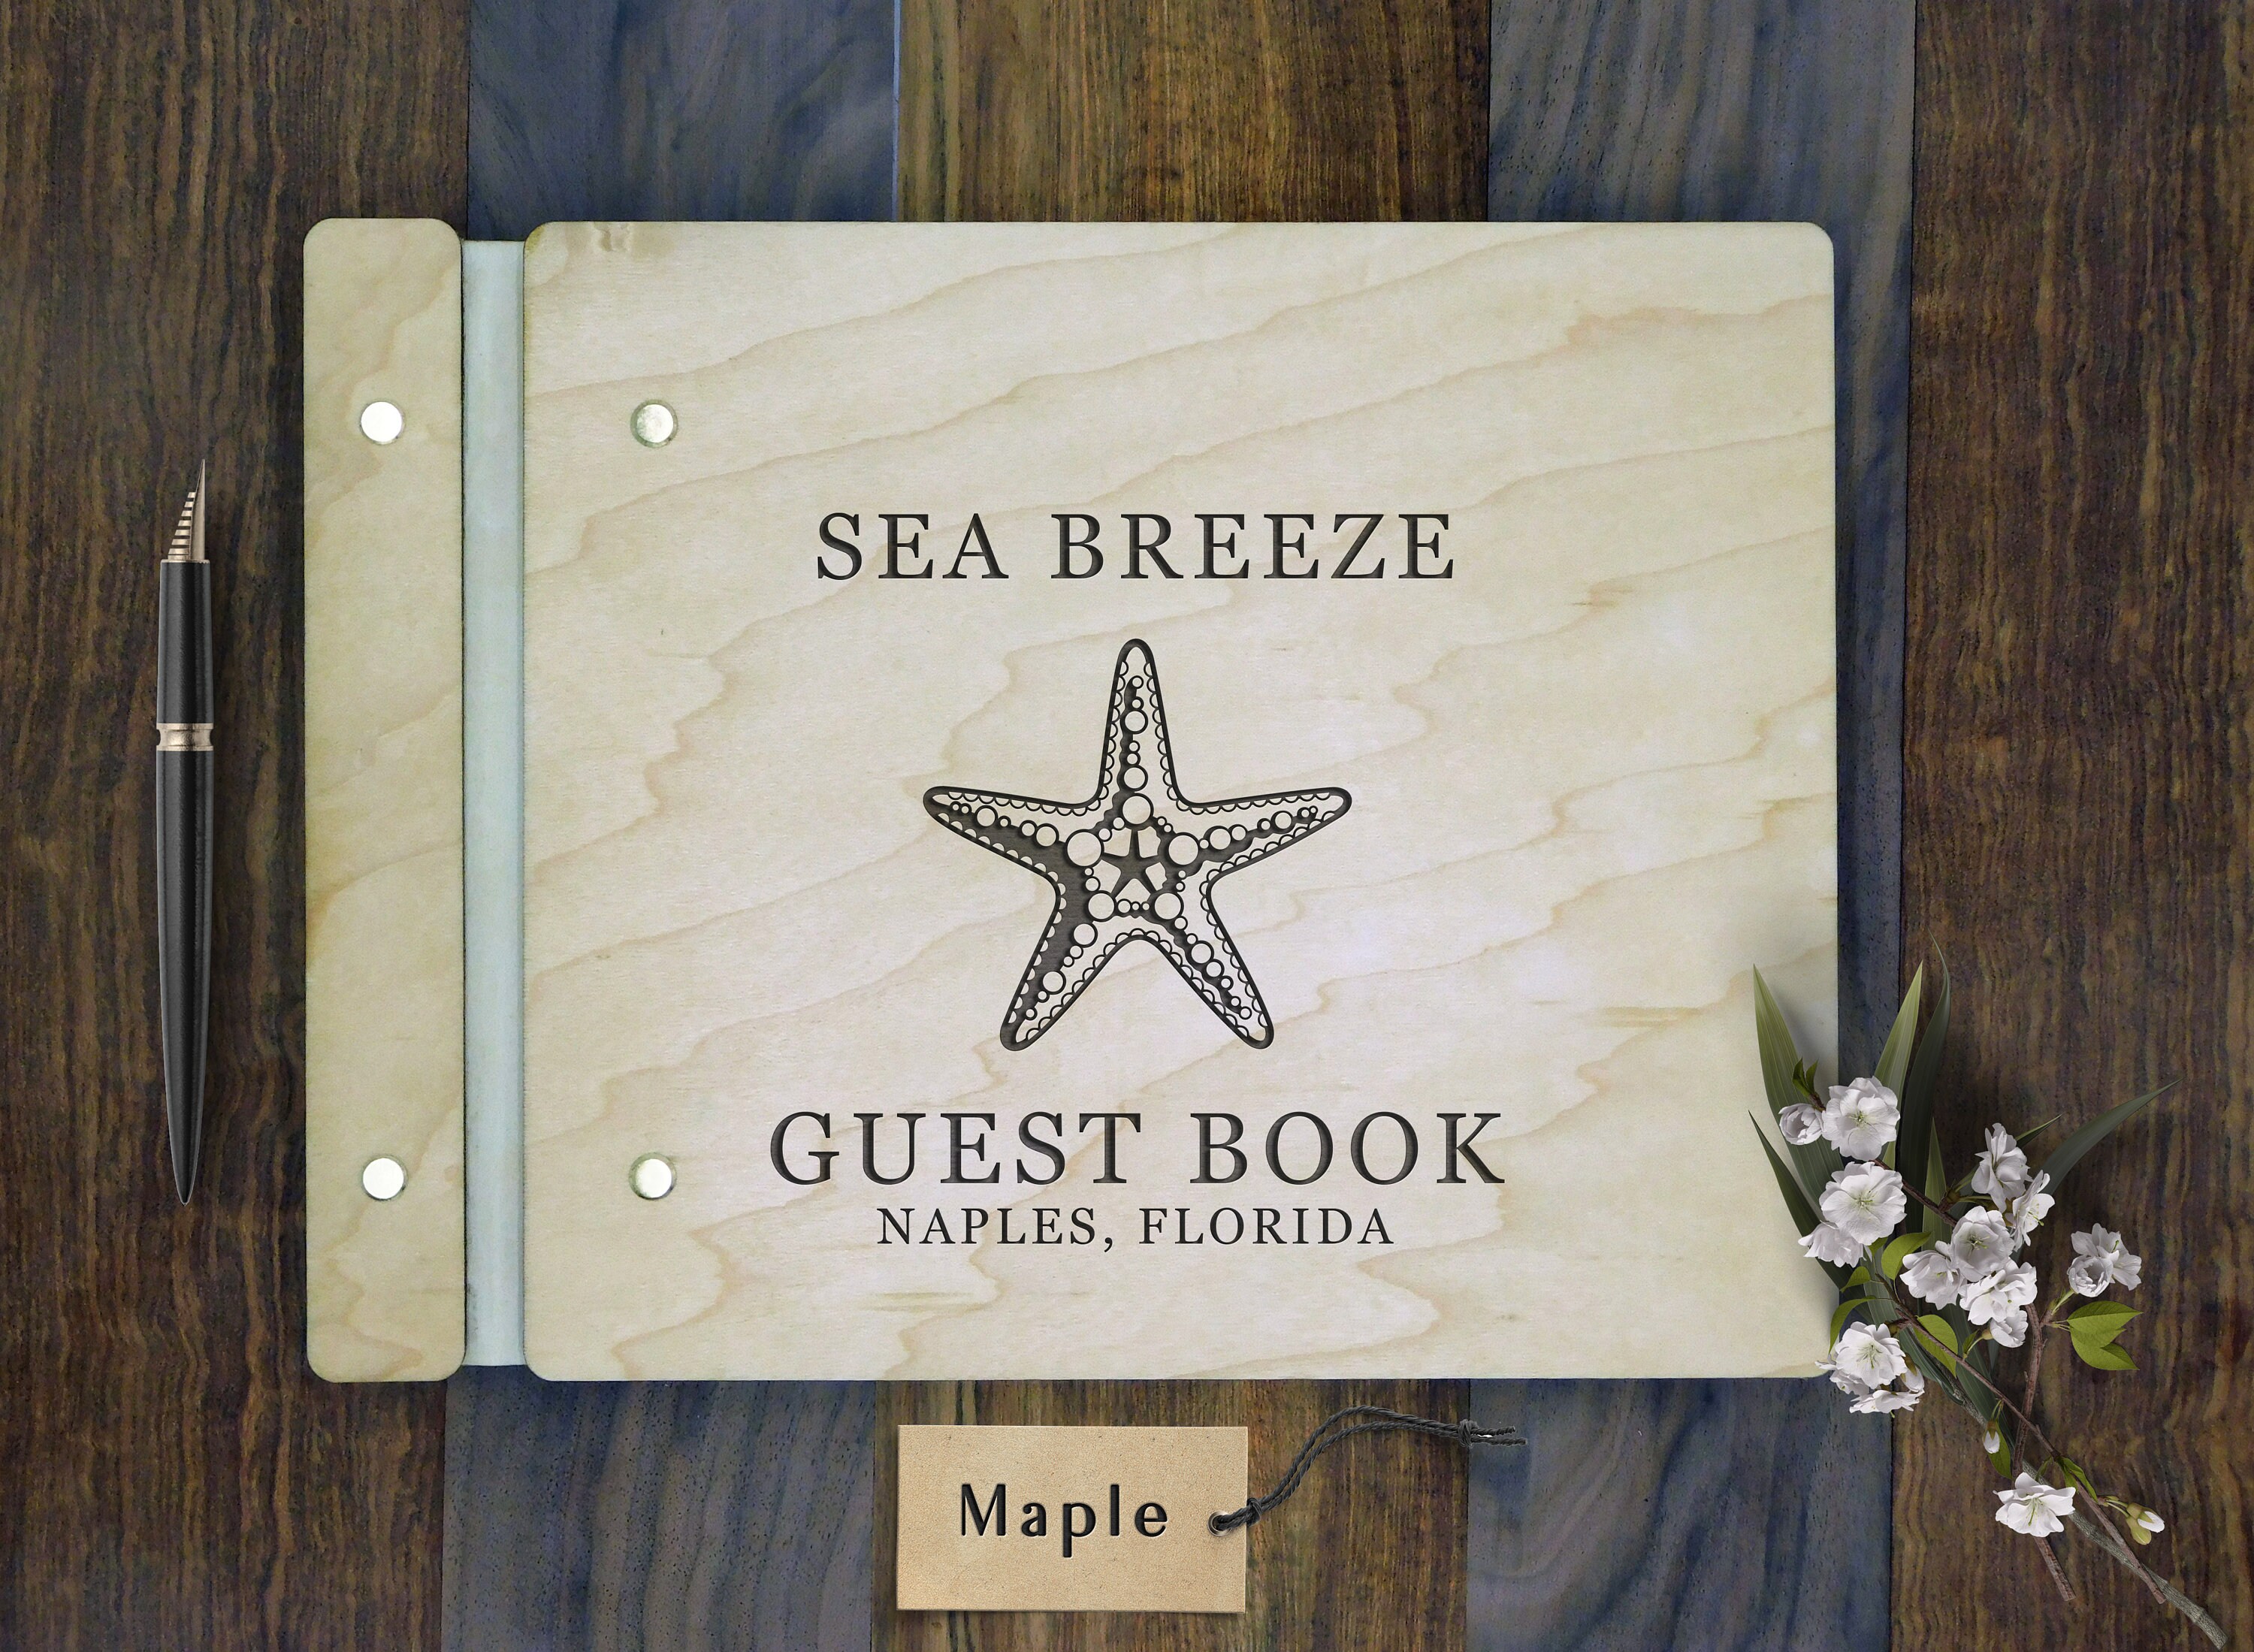  Beach Home Guest Book (Hardcover): A Guest Sign In Book For  Airbnb Vacation Home, Beach House, Vrbo, Beach Home Rental for Visitors:  9798469563310: Windsor, Ivy Rose: Books